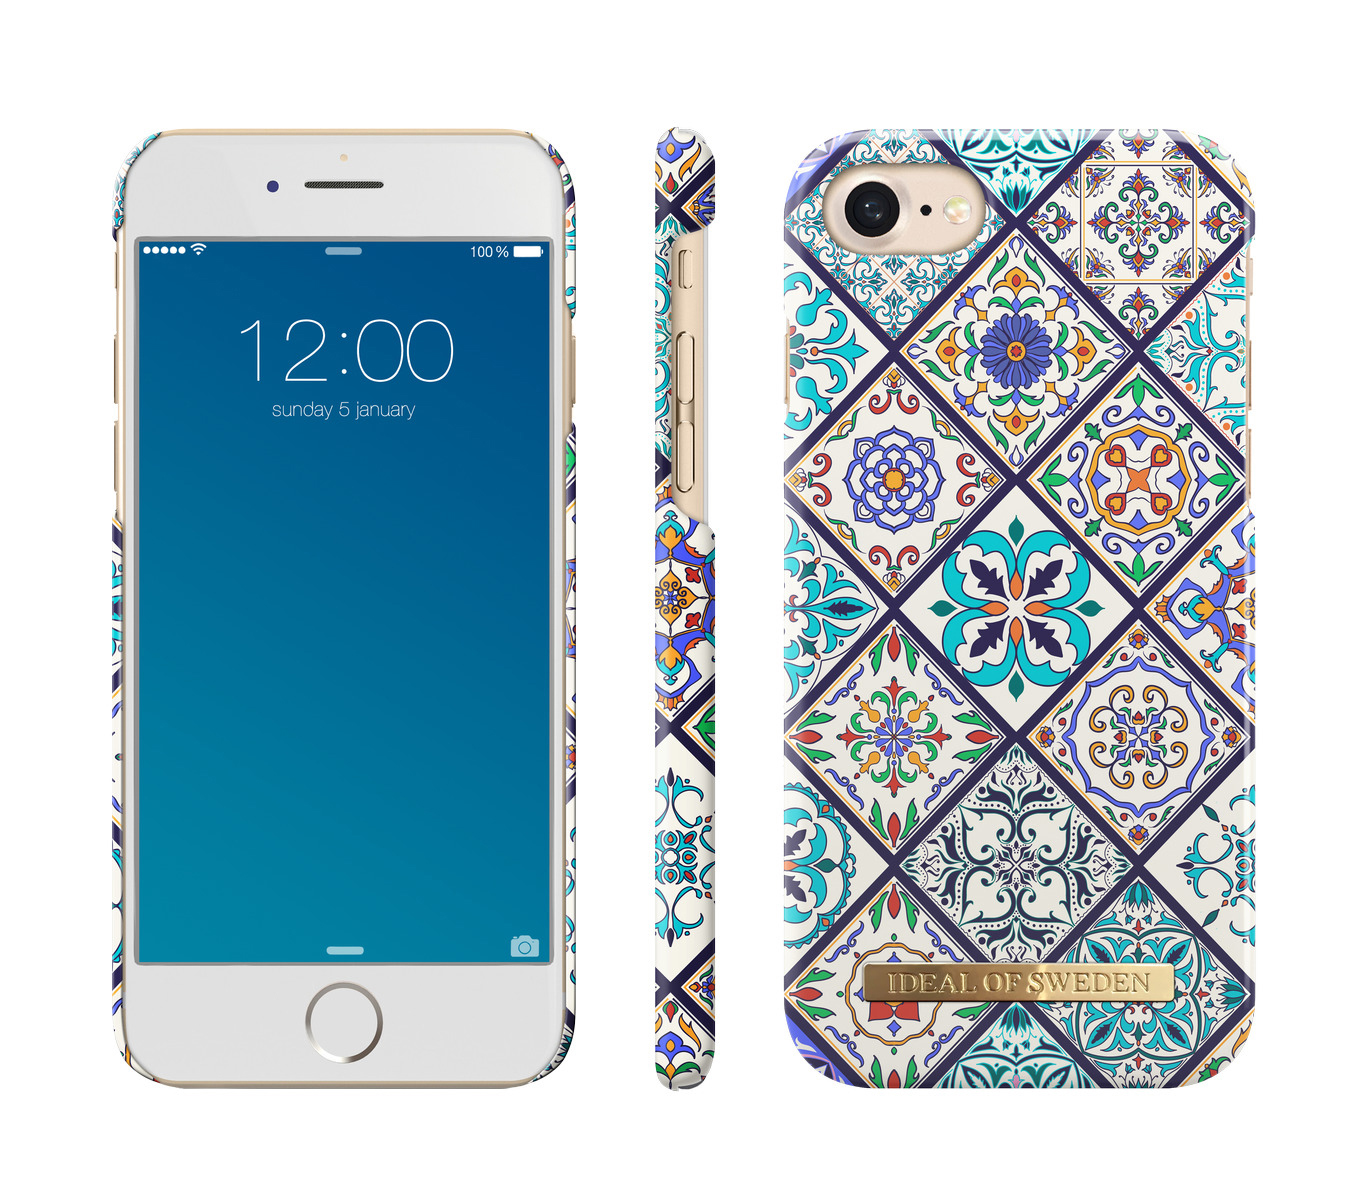 IDEAL Apple, SWEDEN iPhone 8, 7, Backcover, iPhone iPhone Mosaic Fashion, OF 6,